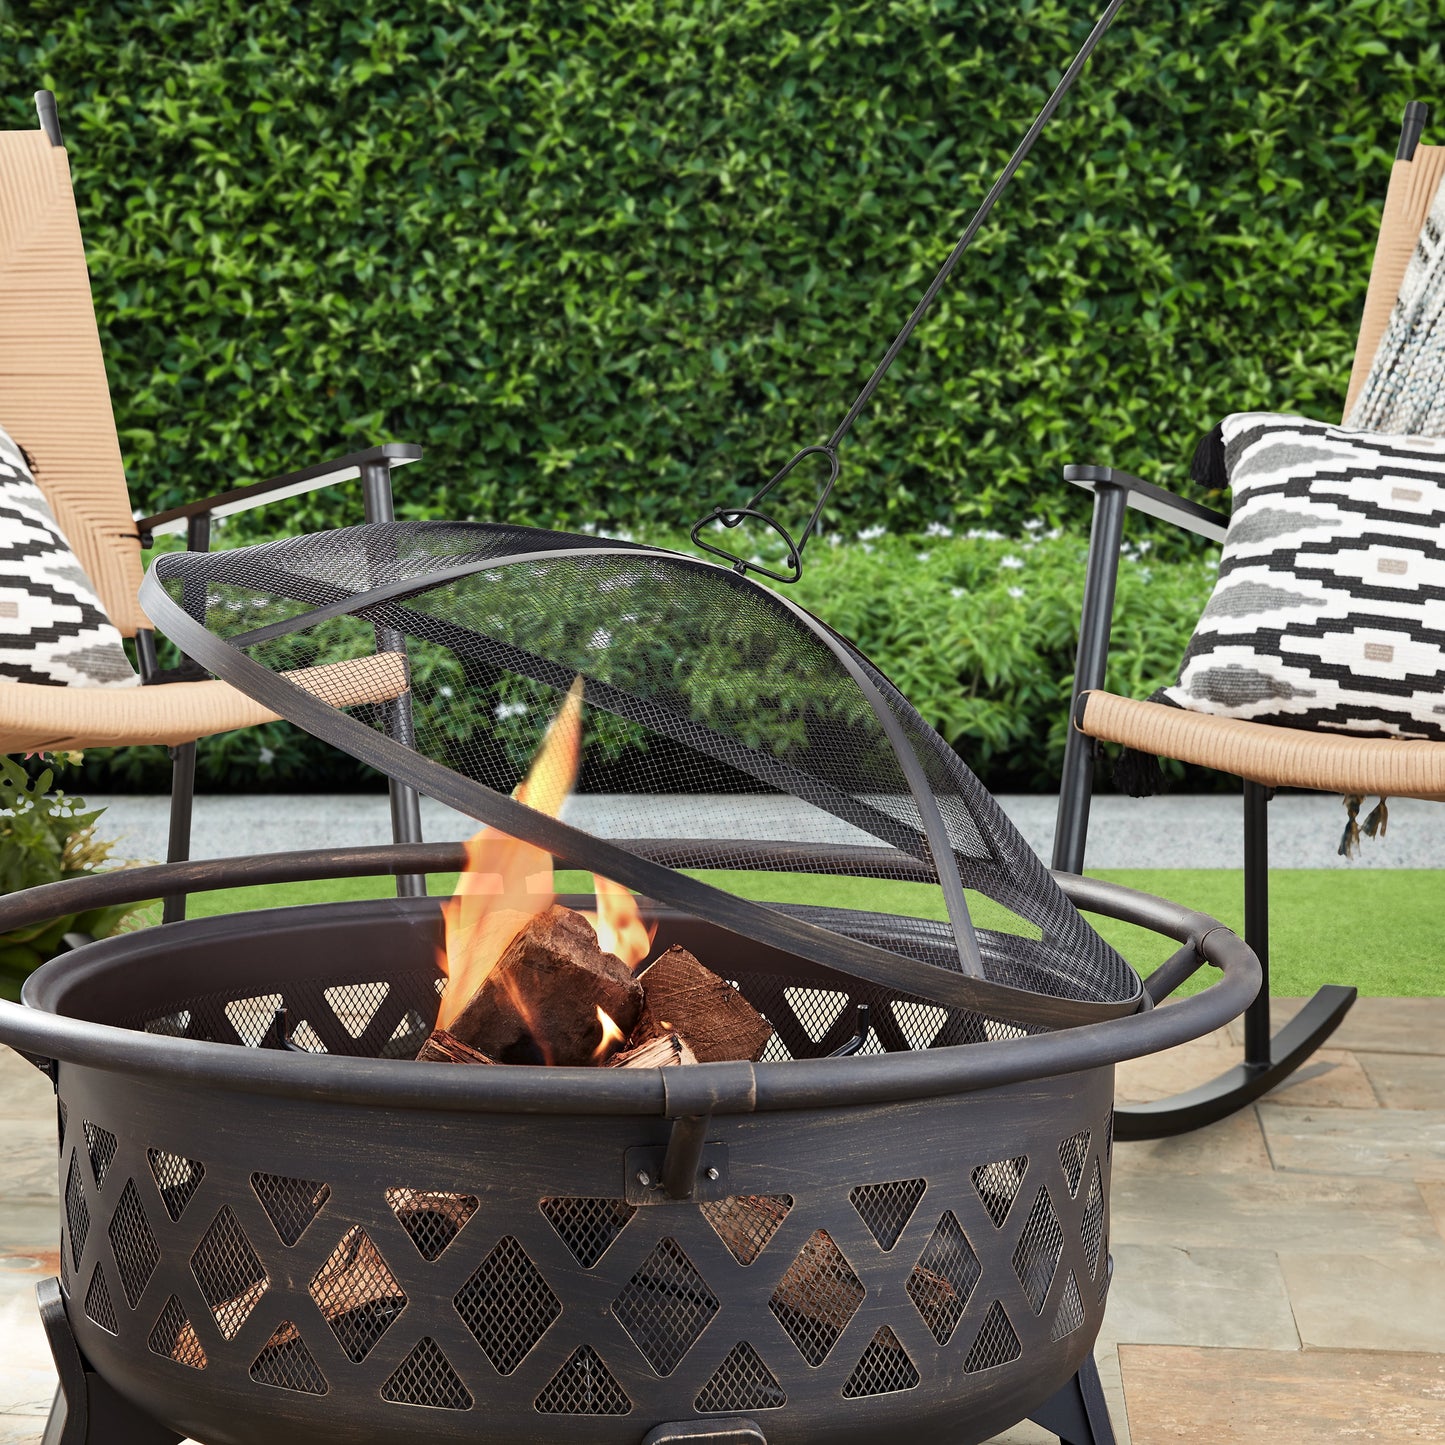 35" round Lattice Wood Burning Fire Pit with Cover, Antique Bronze - Design By Technique